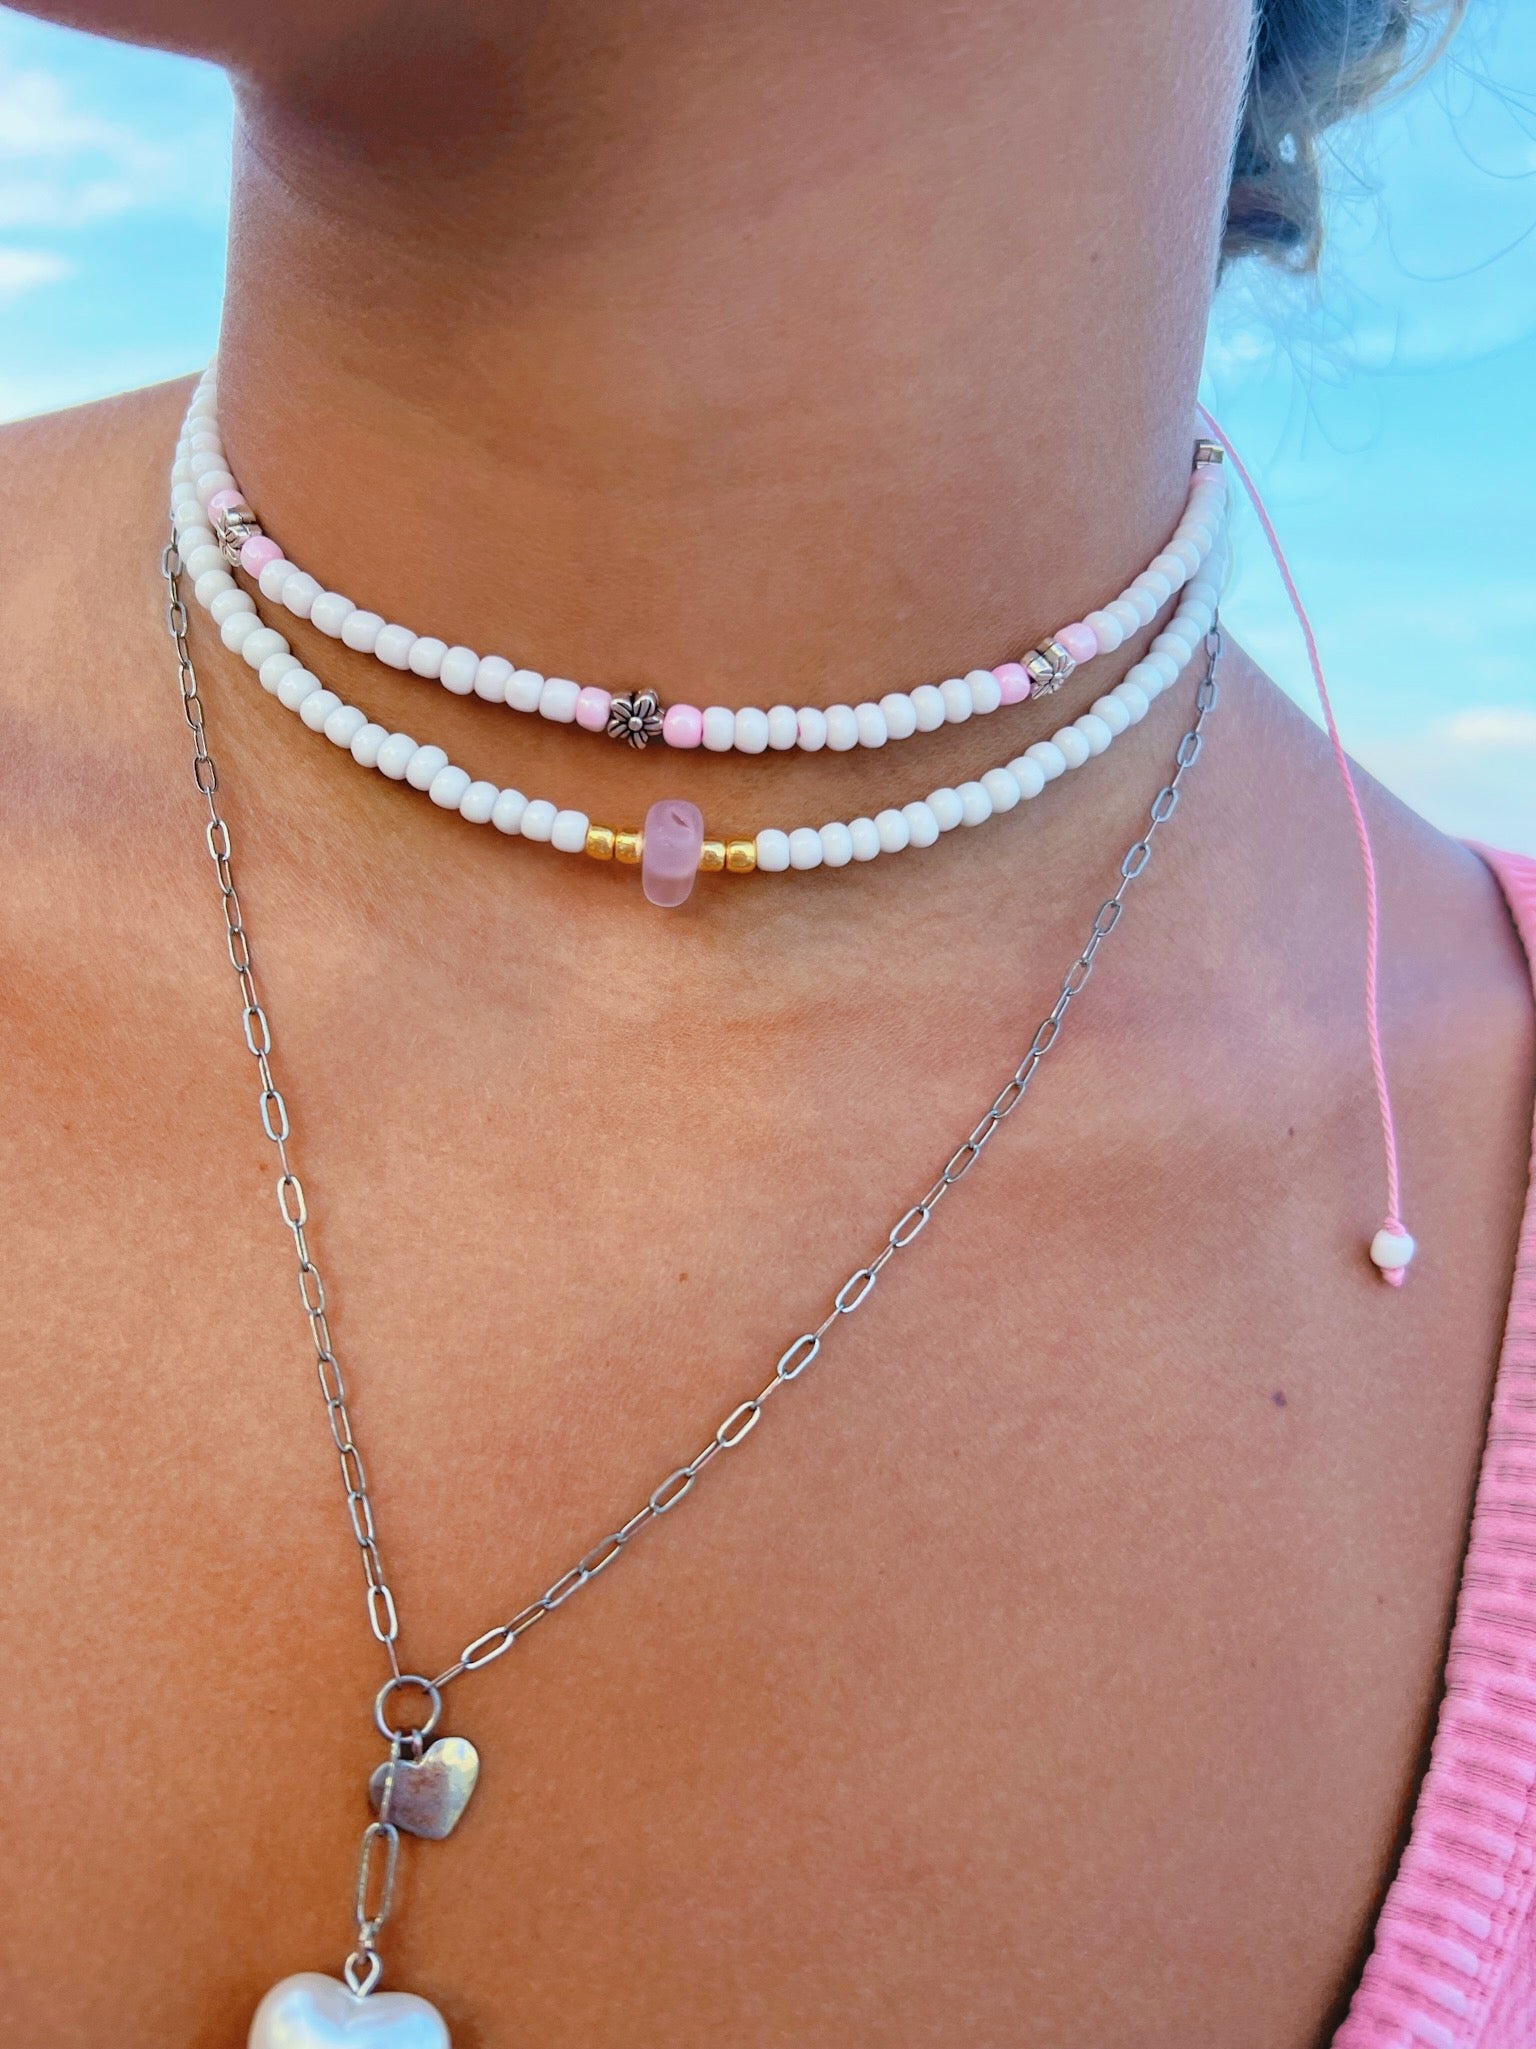 Coastal beads by rebecca Gemstone beaded choker necklace jewelry -  accessories necklaces at Treppie